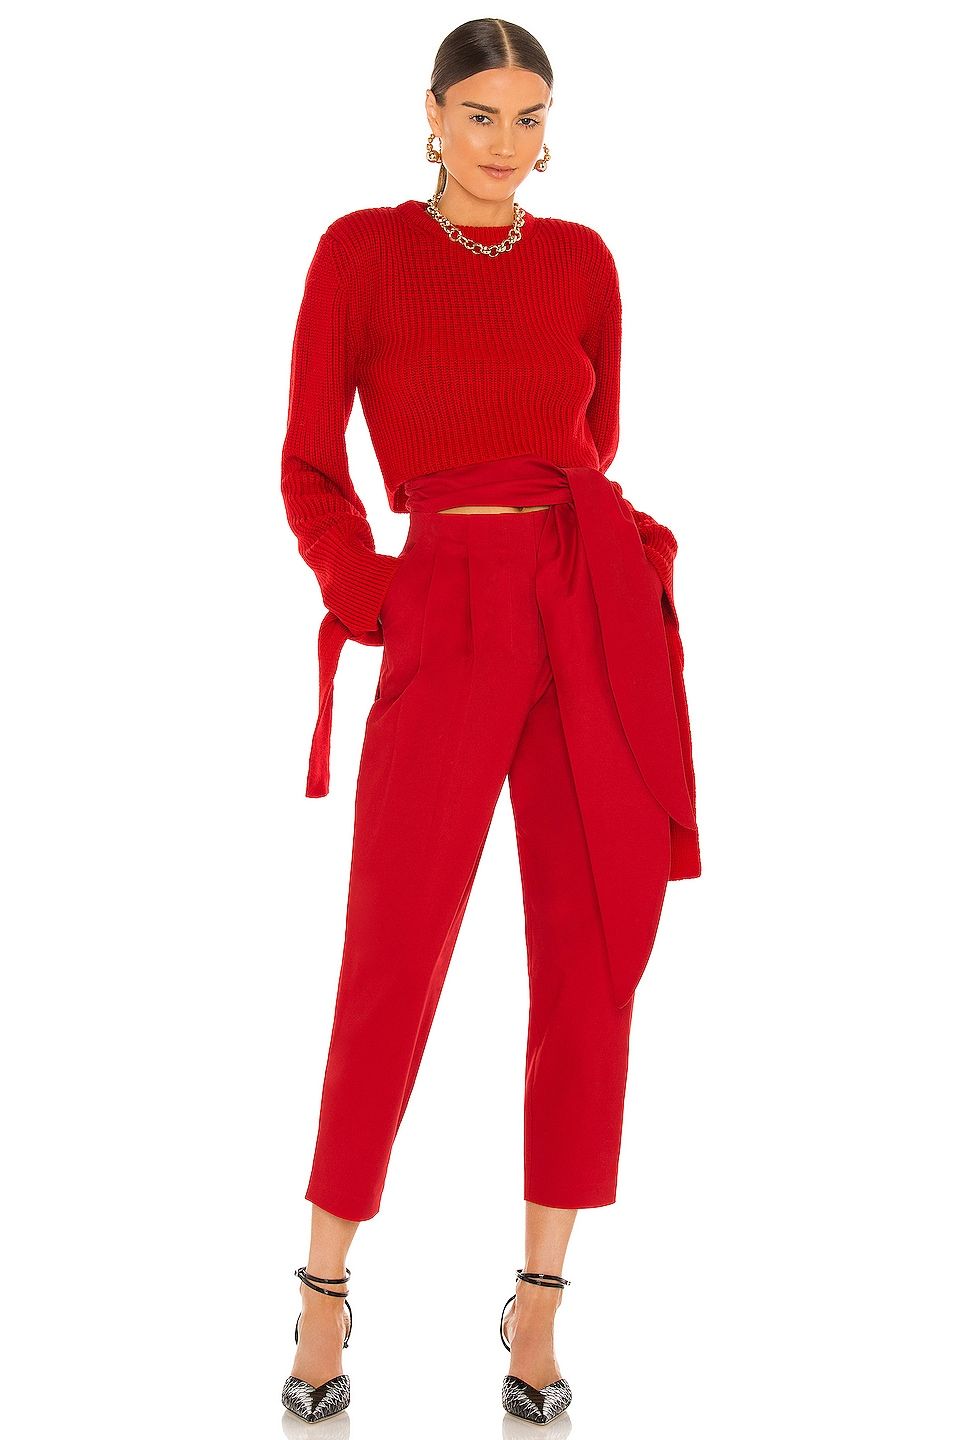 Stunning Red Pants Outfit Ideas. How to Wear Red Pants for Spring Summer? 